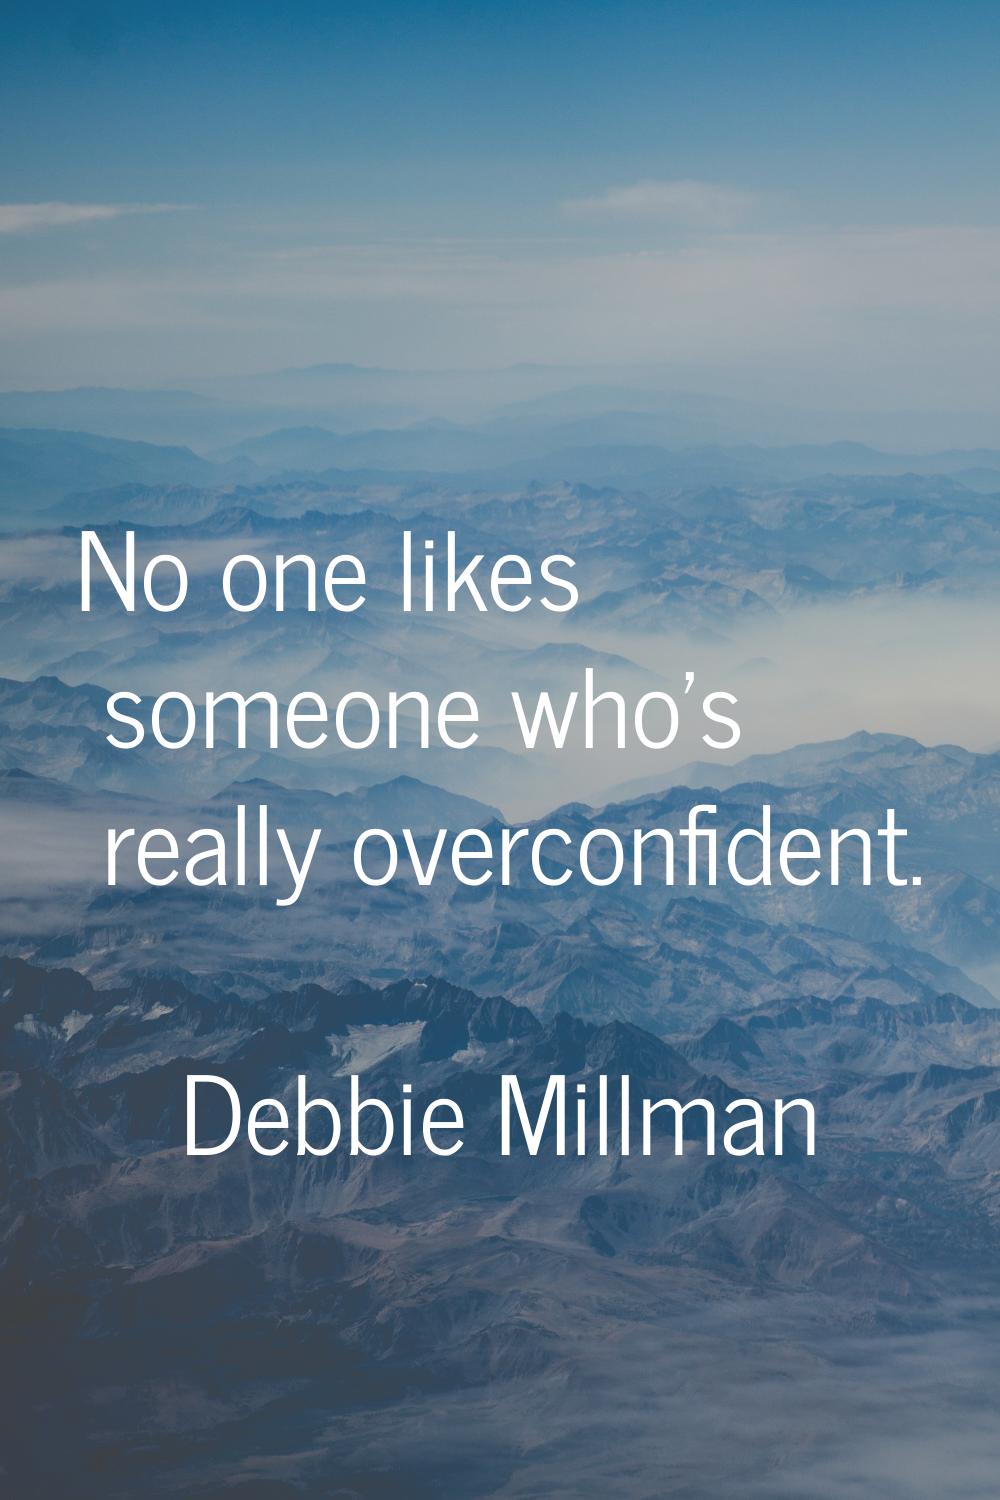 No one likes someone who's really overconfident.